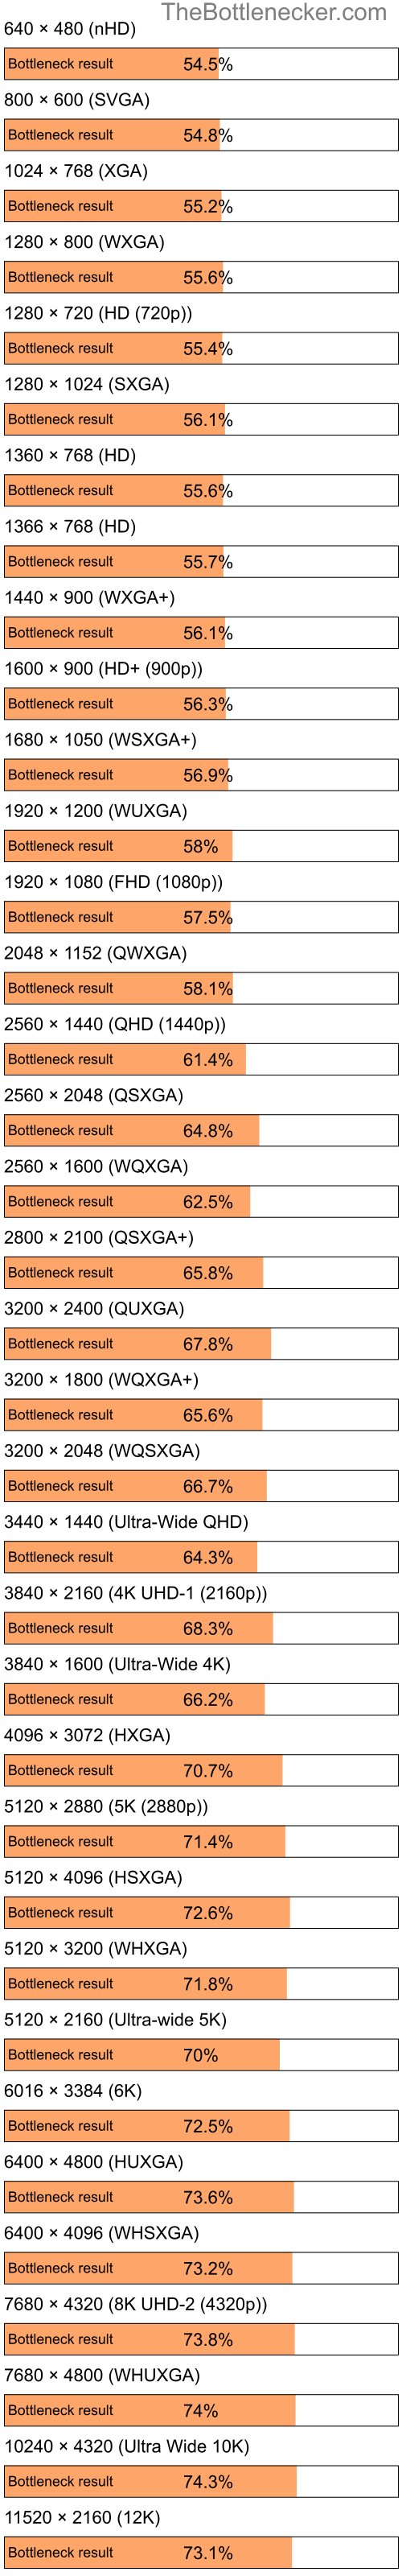 Bottleneck results by resolution for Intel Celeron M and AMD Mobility Radeon HD 2400 in Processor Intense Tasks